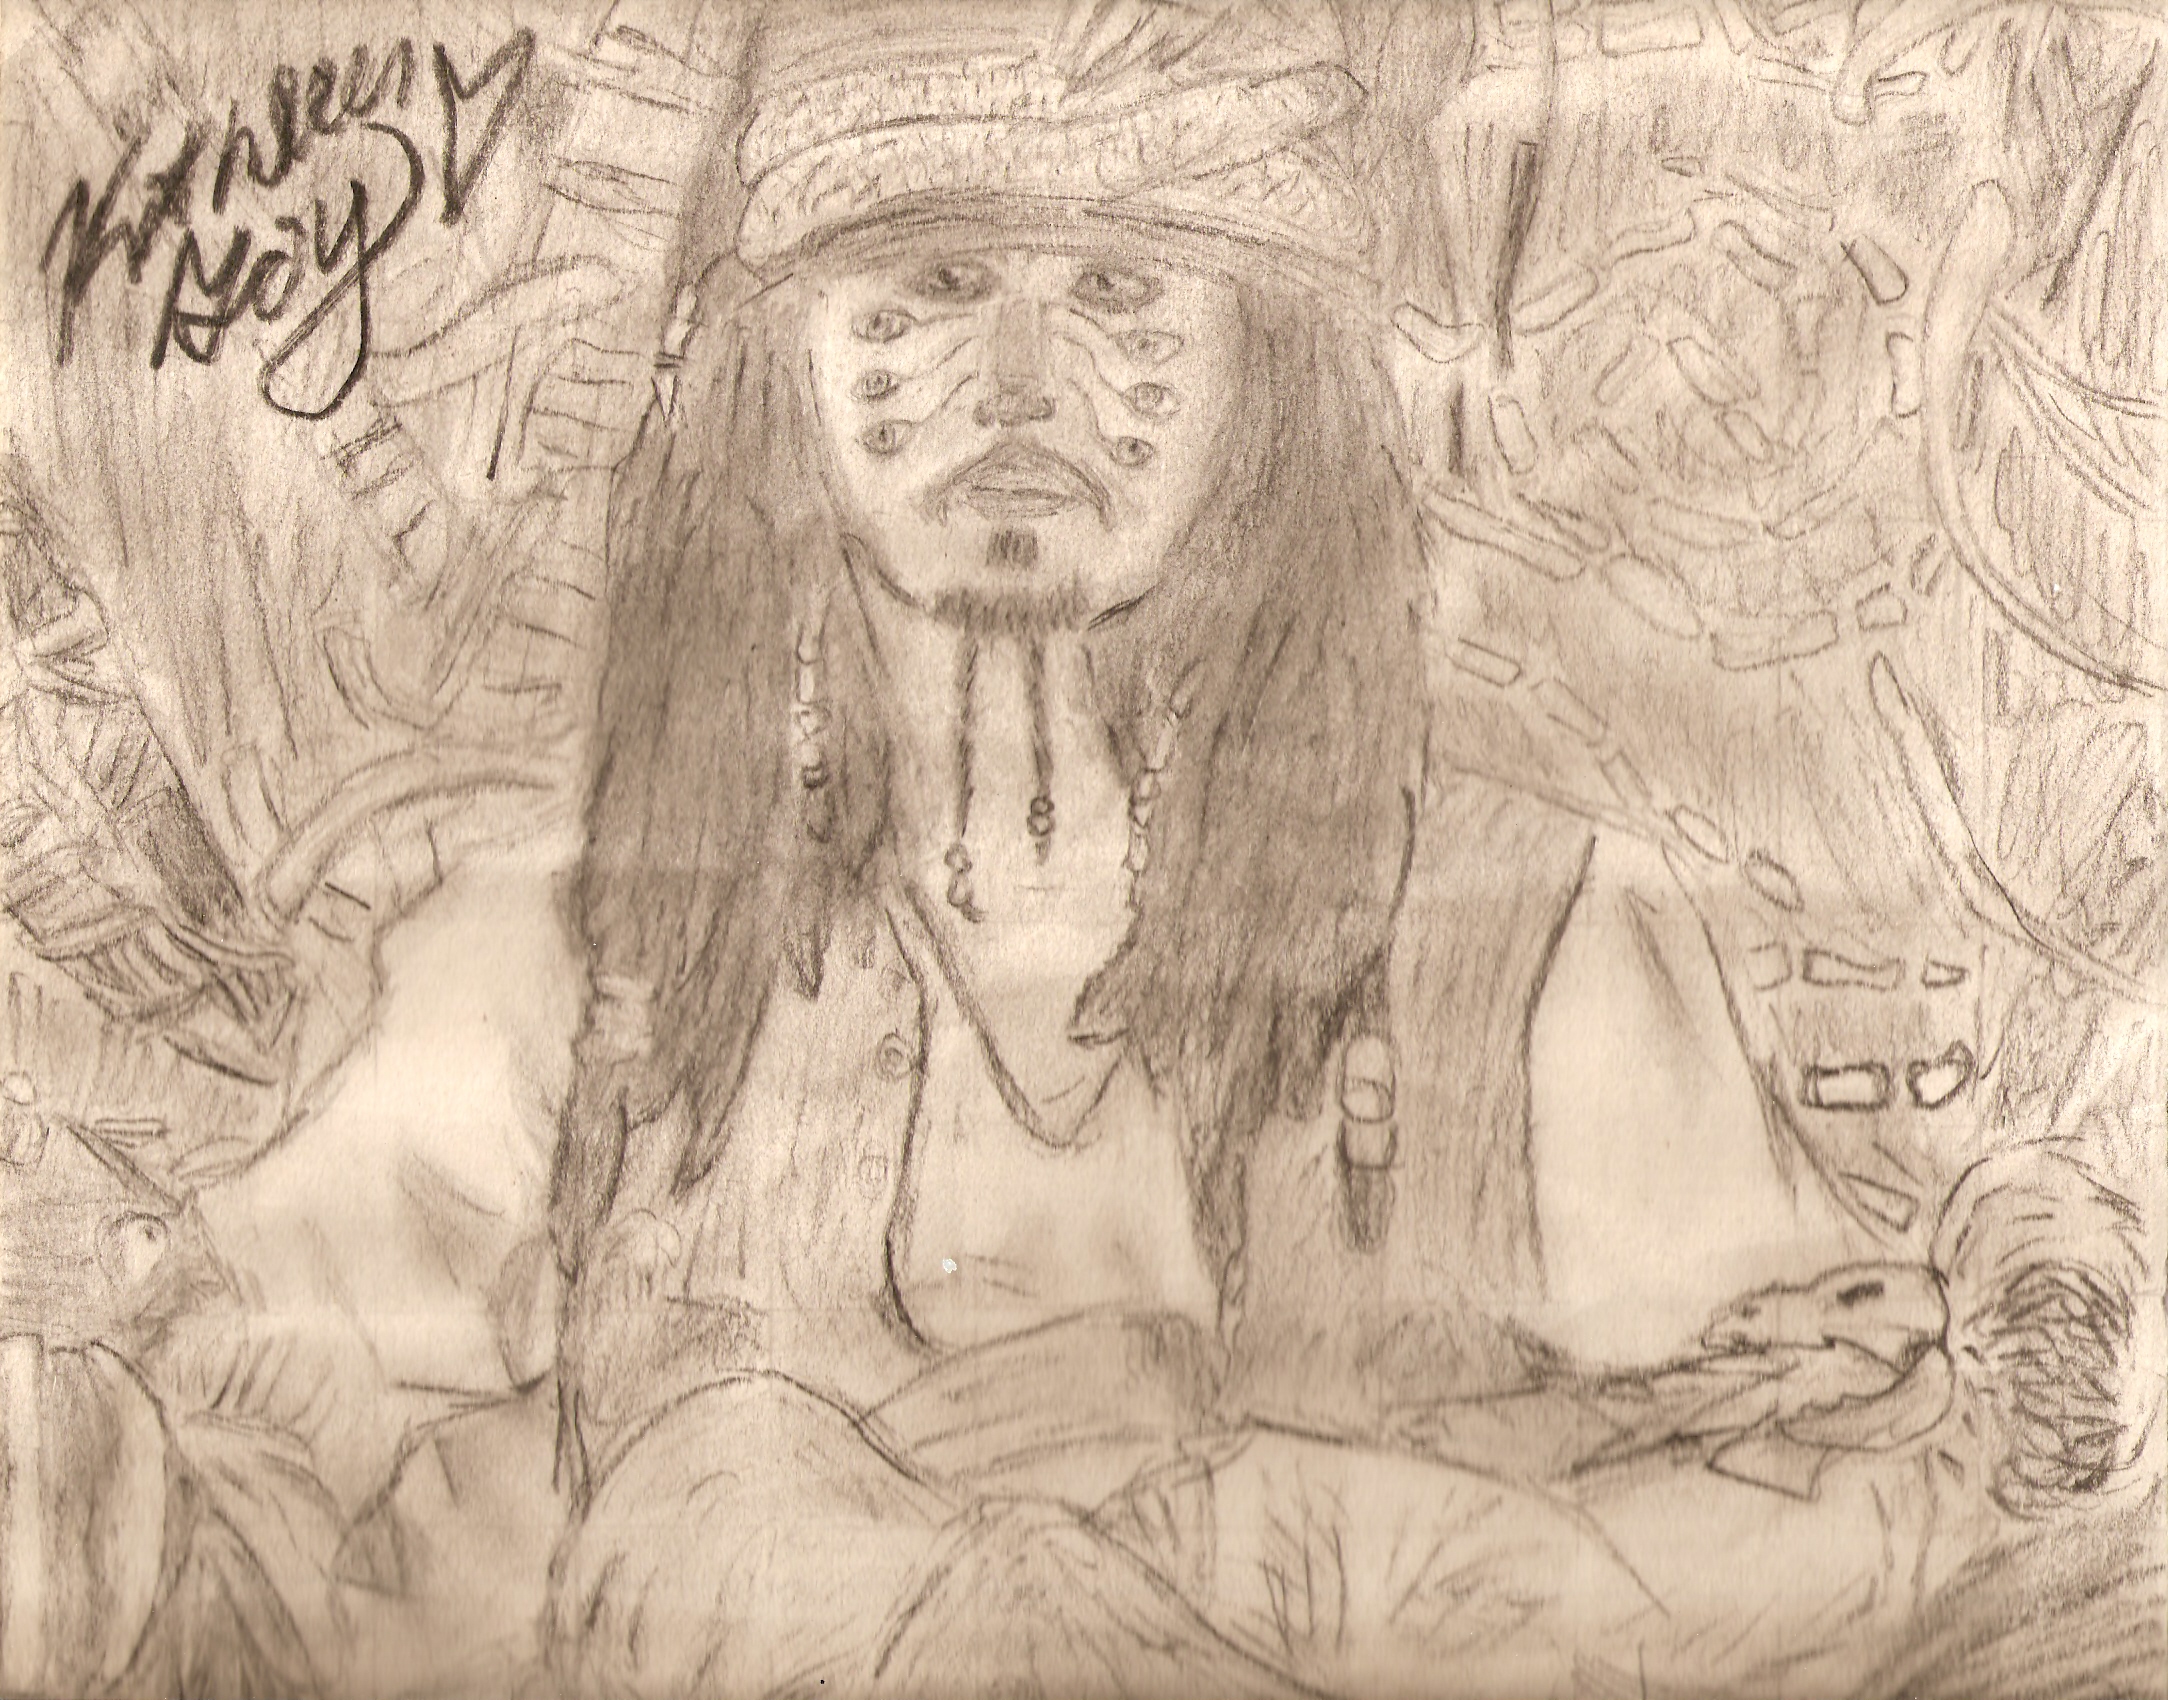 Cannibal Jack Sparrow by pencilplayer